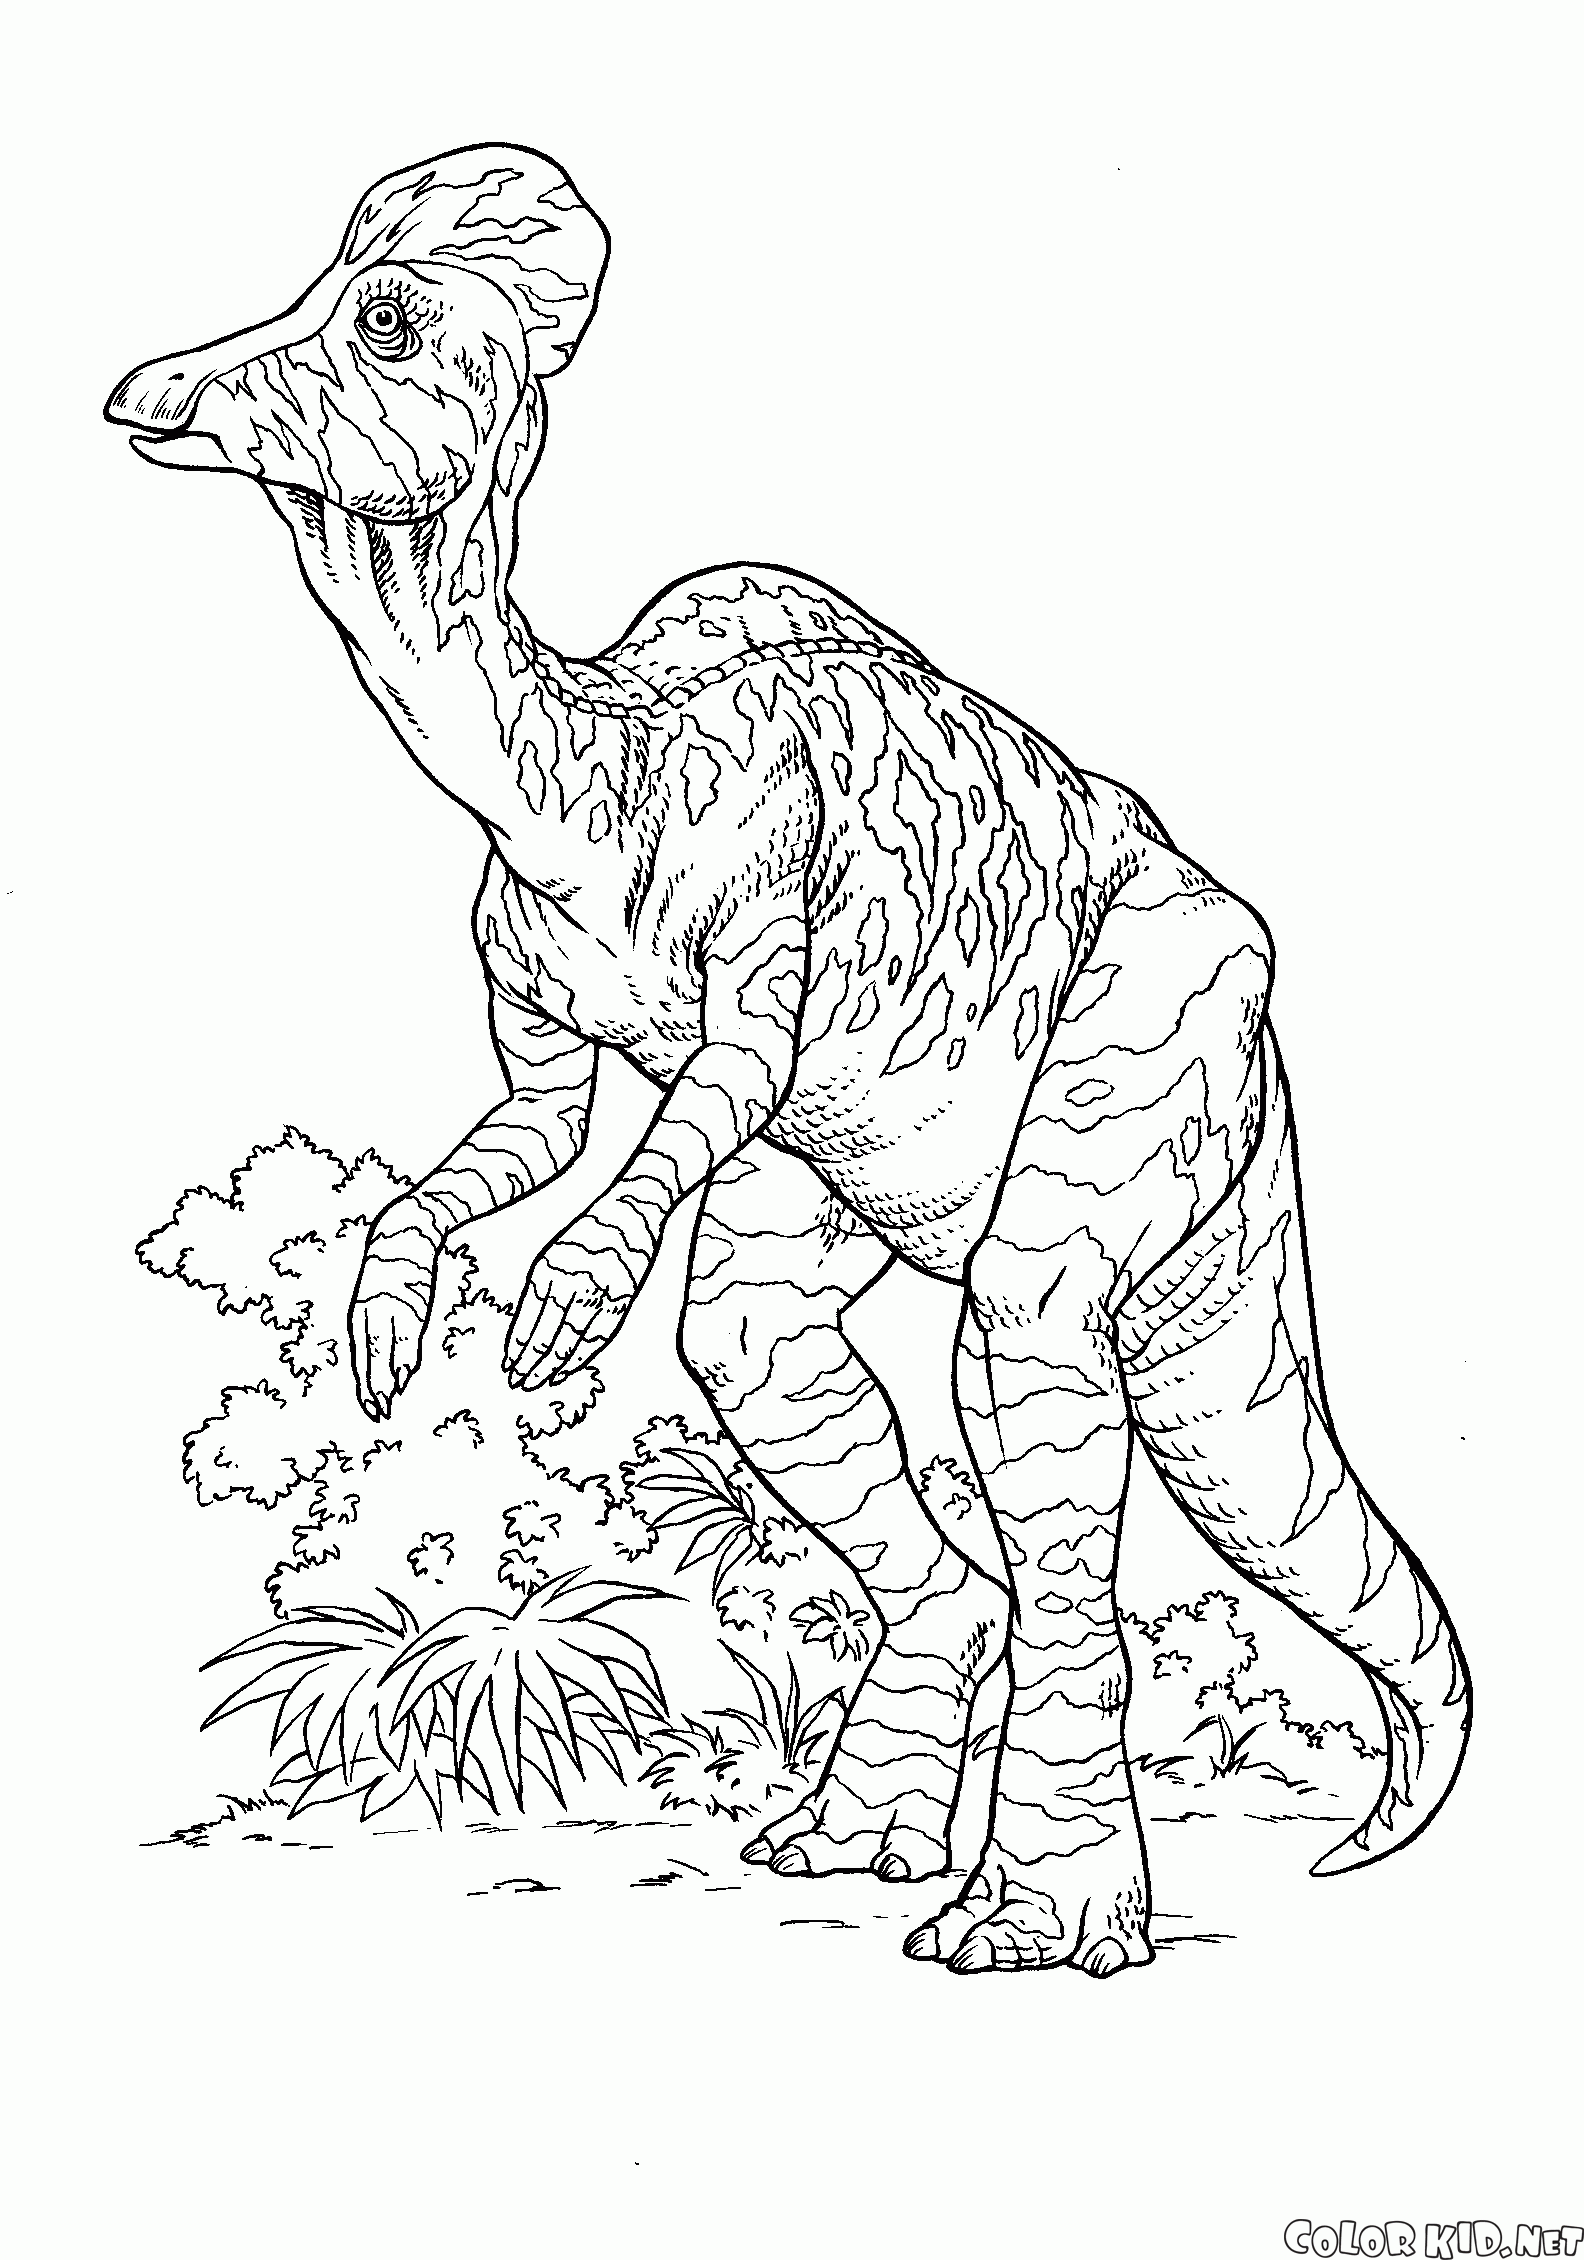 underwater dinosaurs coloring pages - photo #27